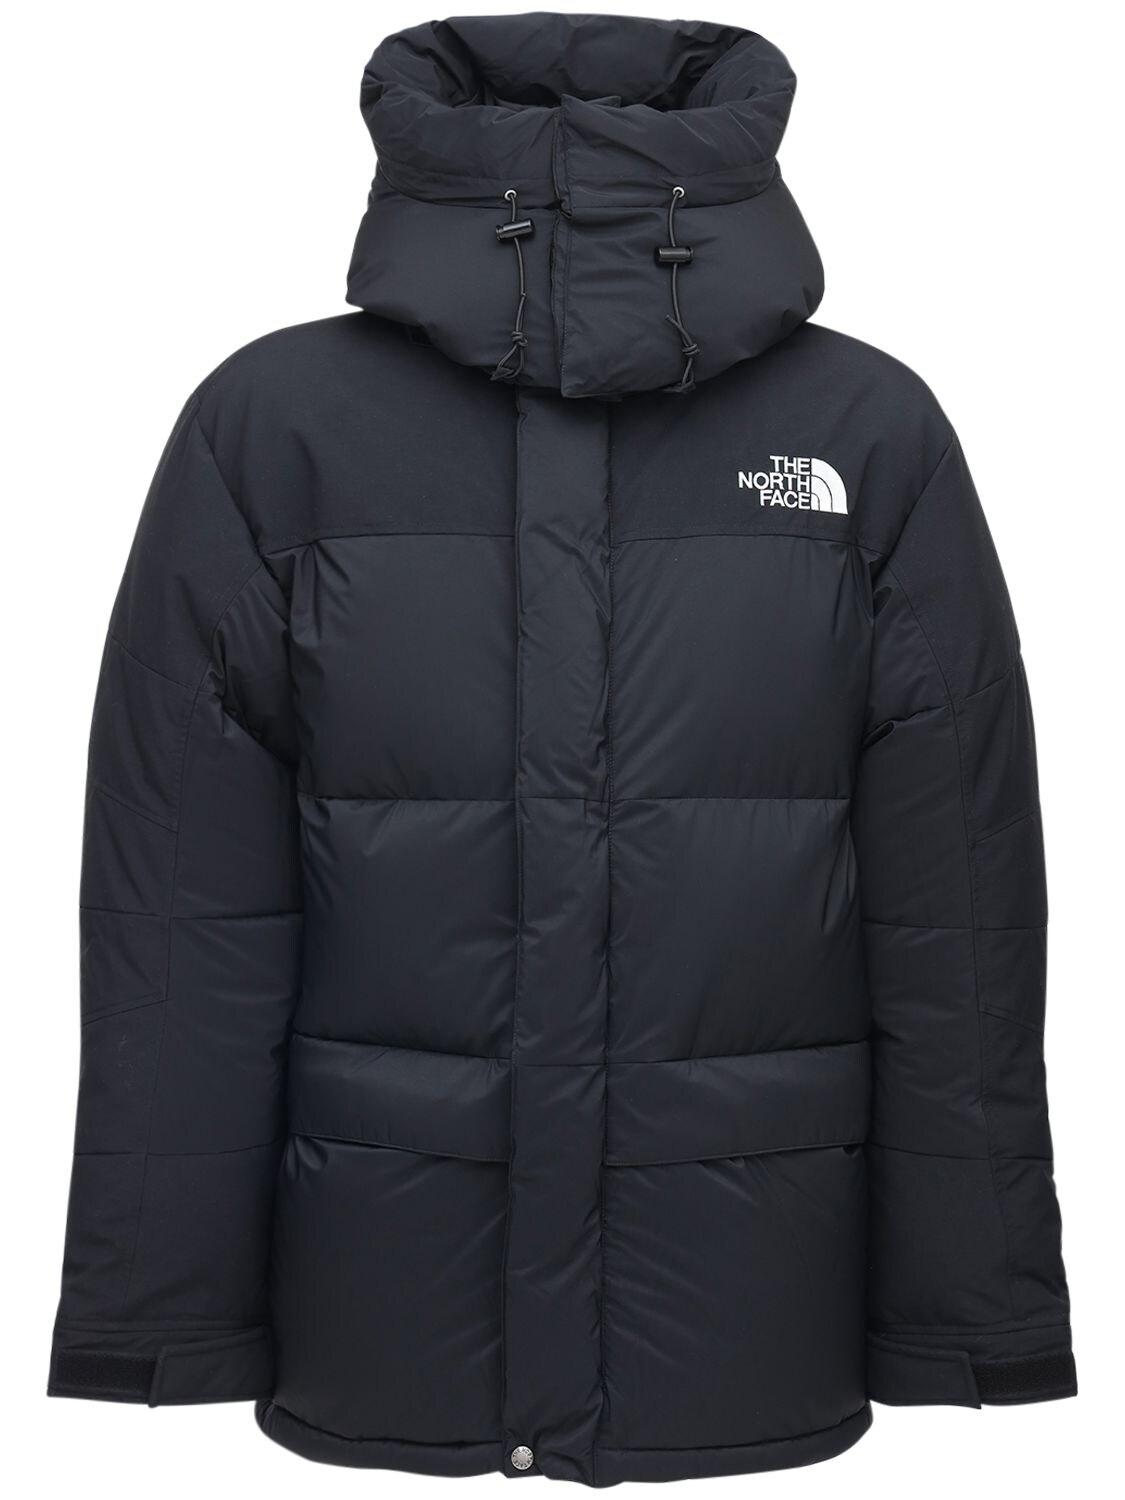 The North Face Retro Himalayan Down Parka in Blue for Men - Lyst